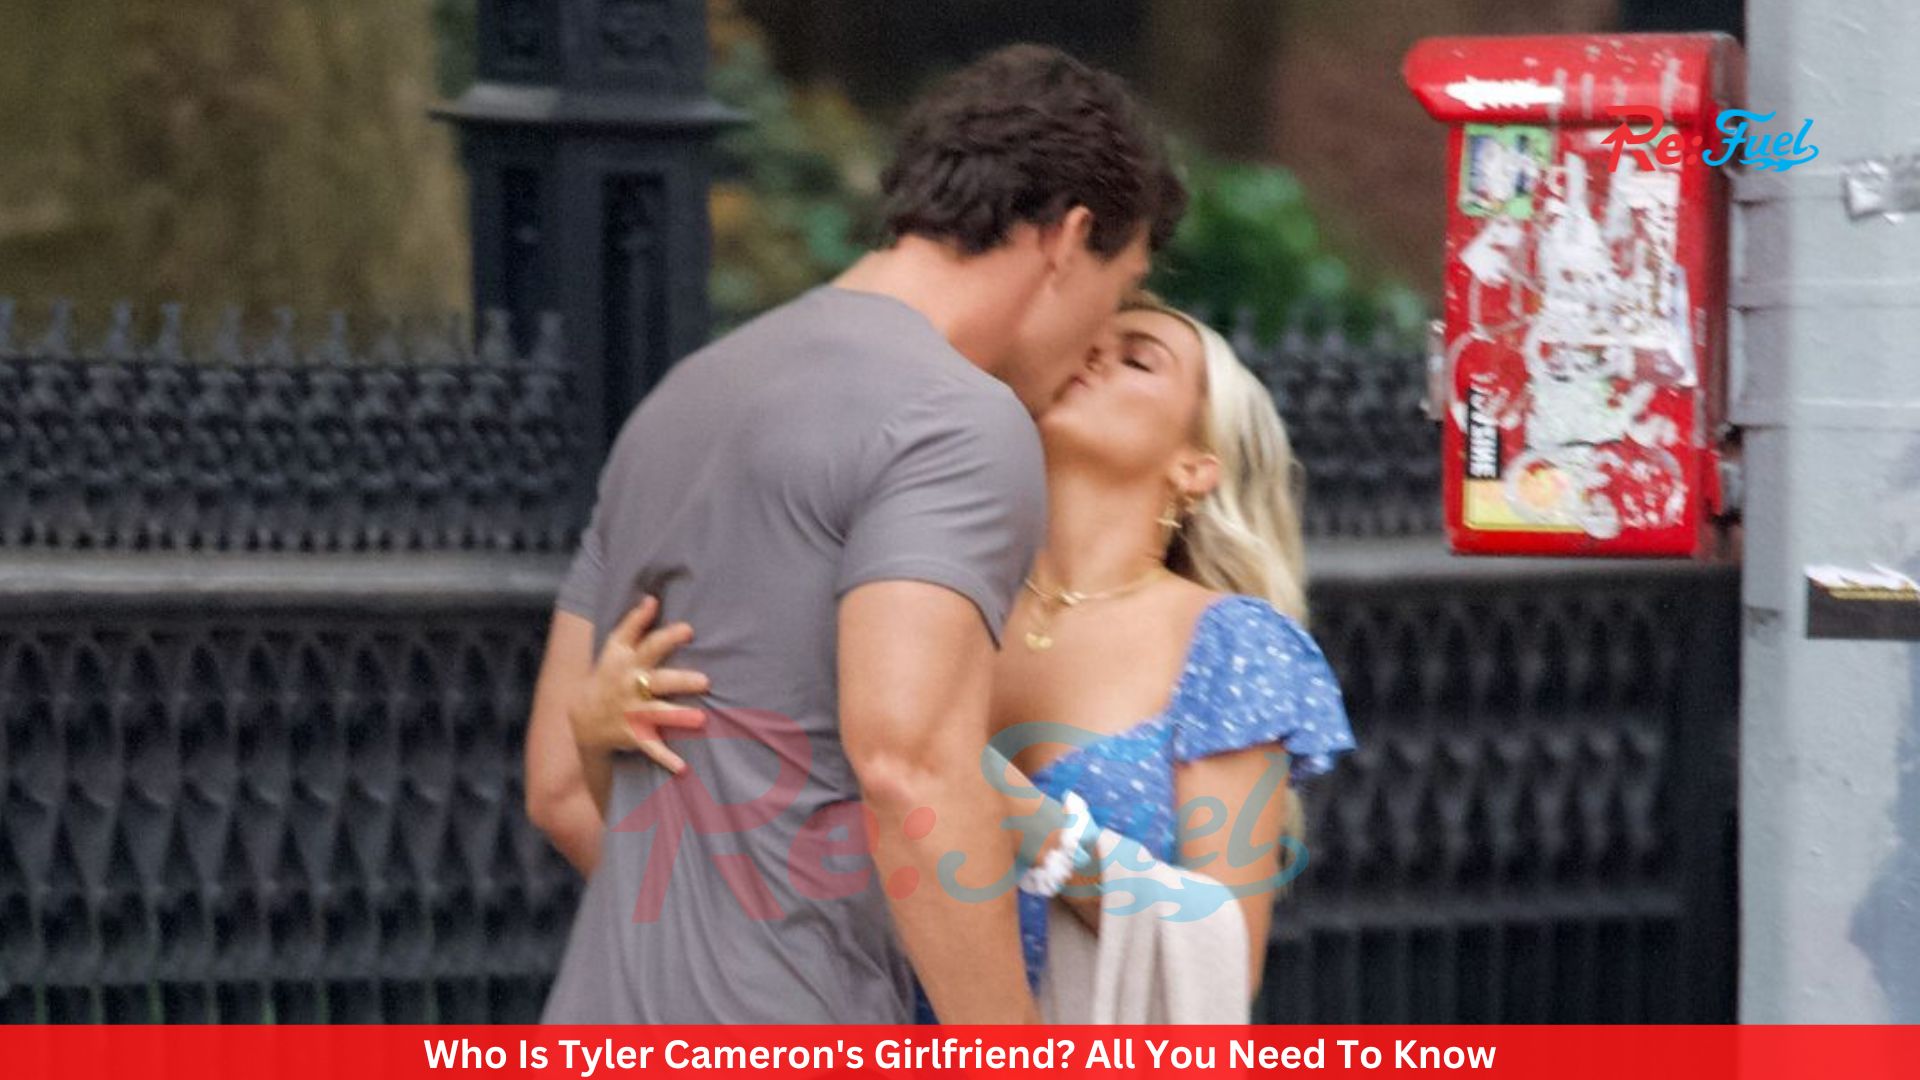 Who Is Tyler Cameron's Girlfriend? All You Need To Know